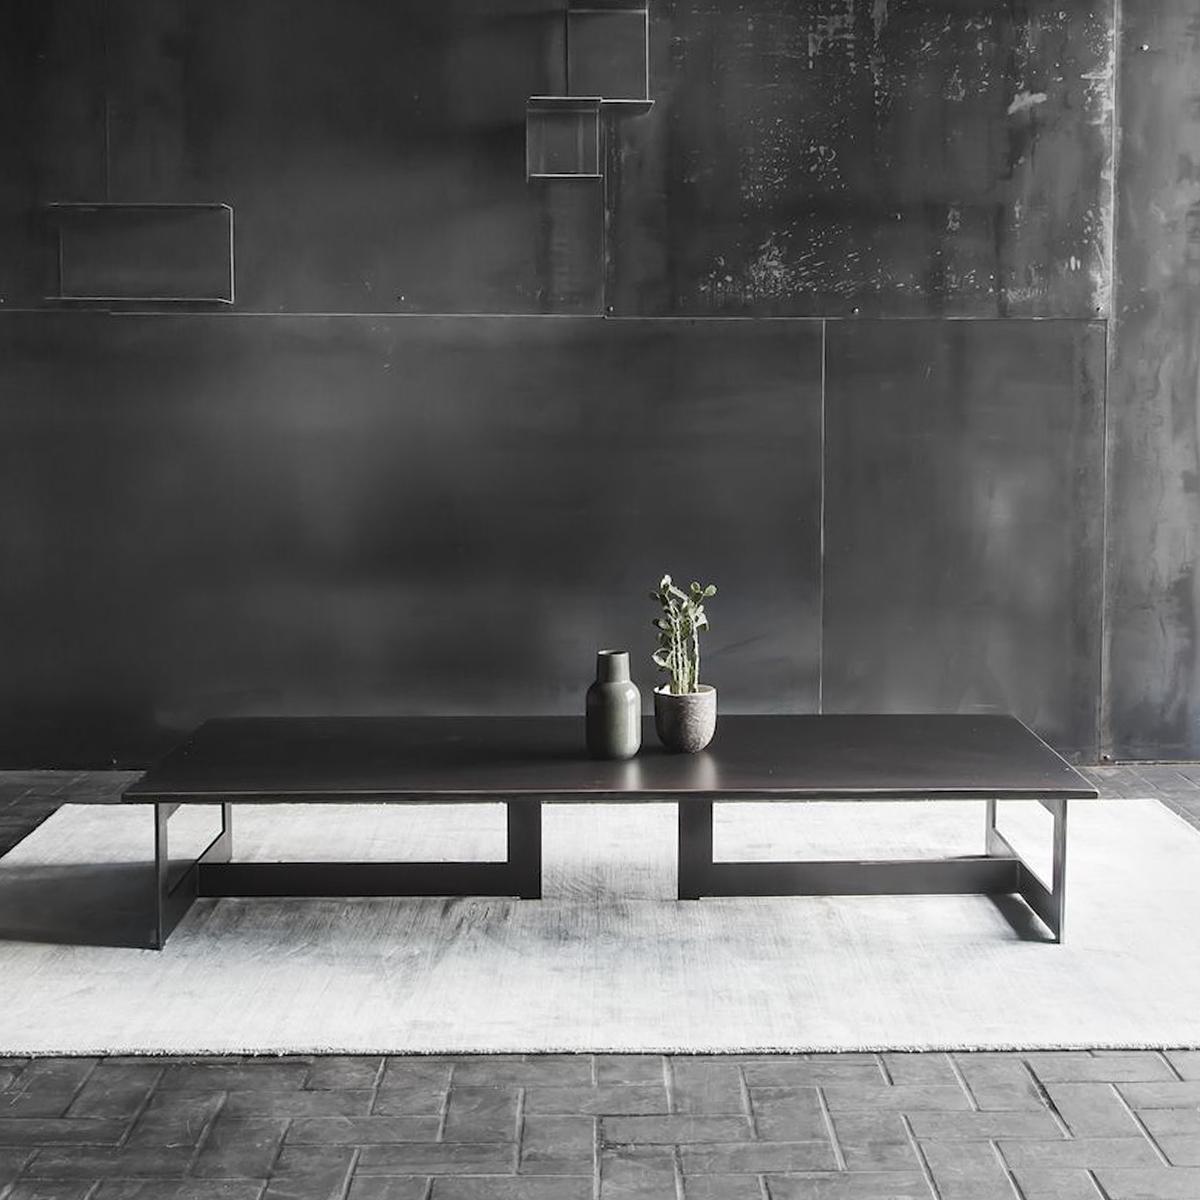 Coffee table steel framed with all 
structure handcrafted in raw dark steel
in dark finish. Available in dark used finish.
Available in:
L 150 x D 1 00 x H 35cm, price: 3900,00€
L 125 x D 125 x H 35cm, price: 4150,00€
Custom made available on